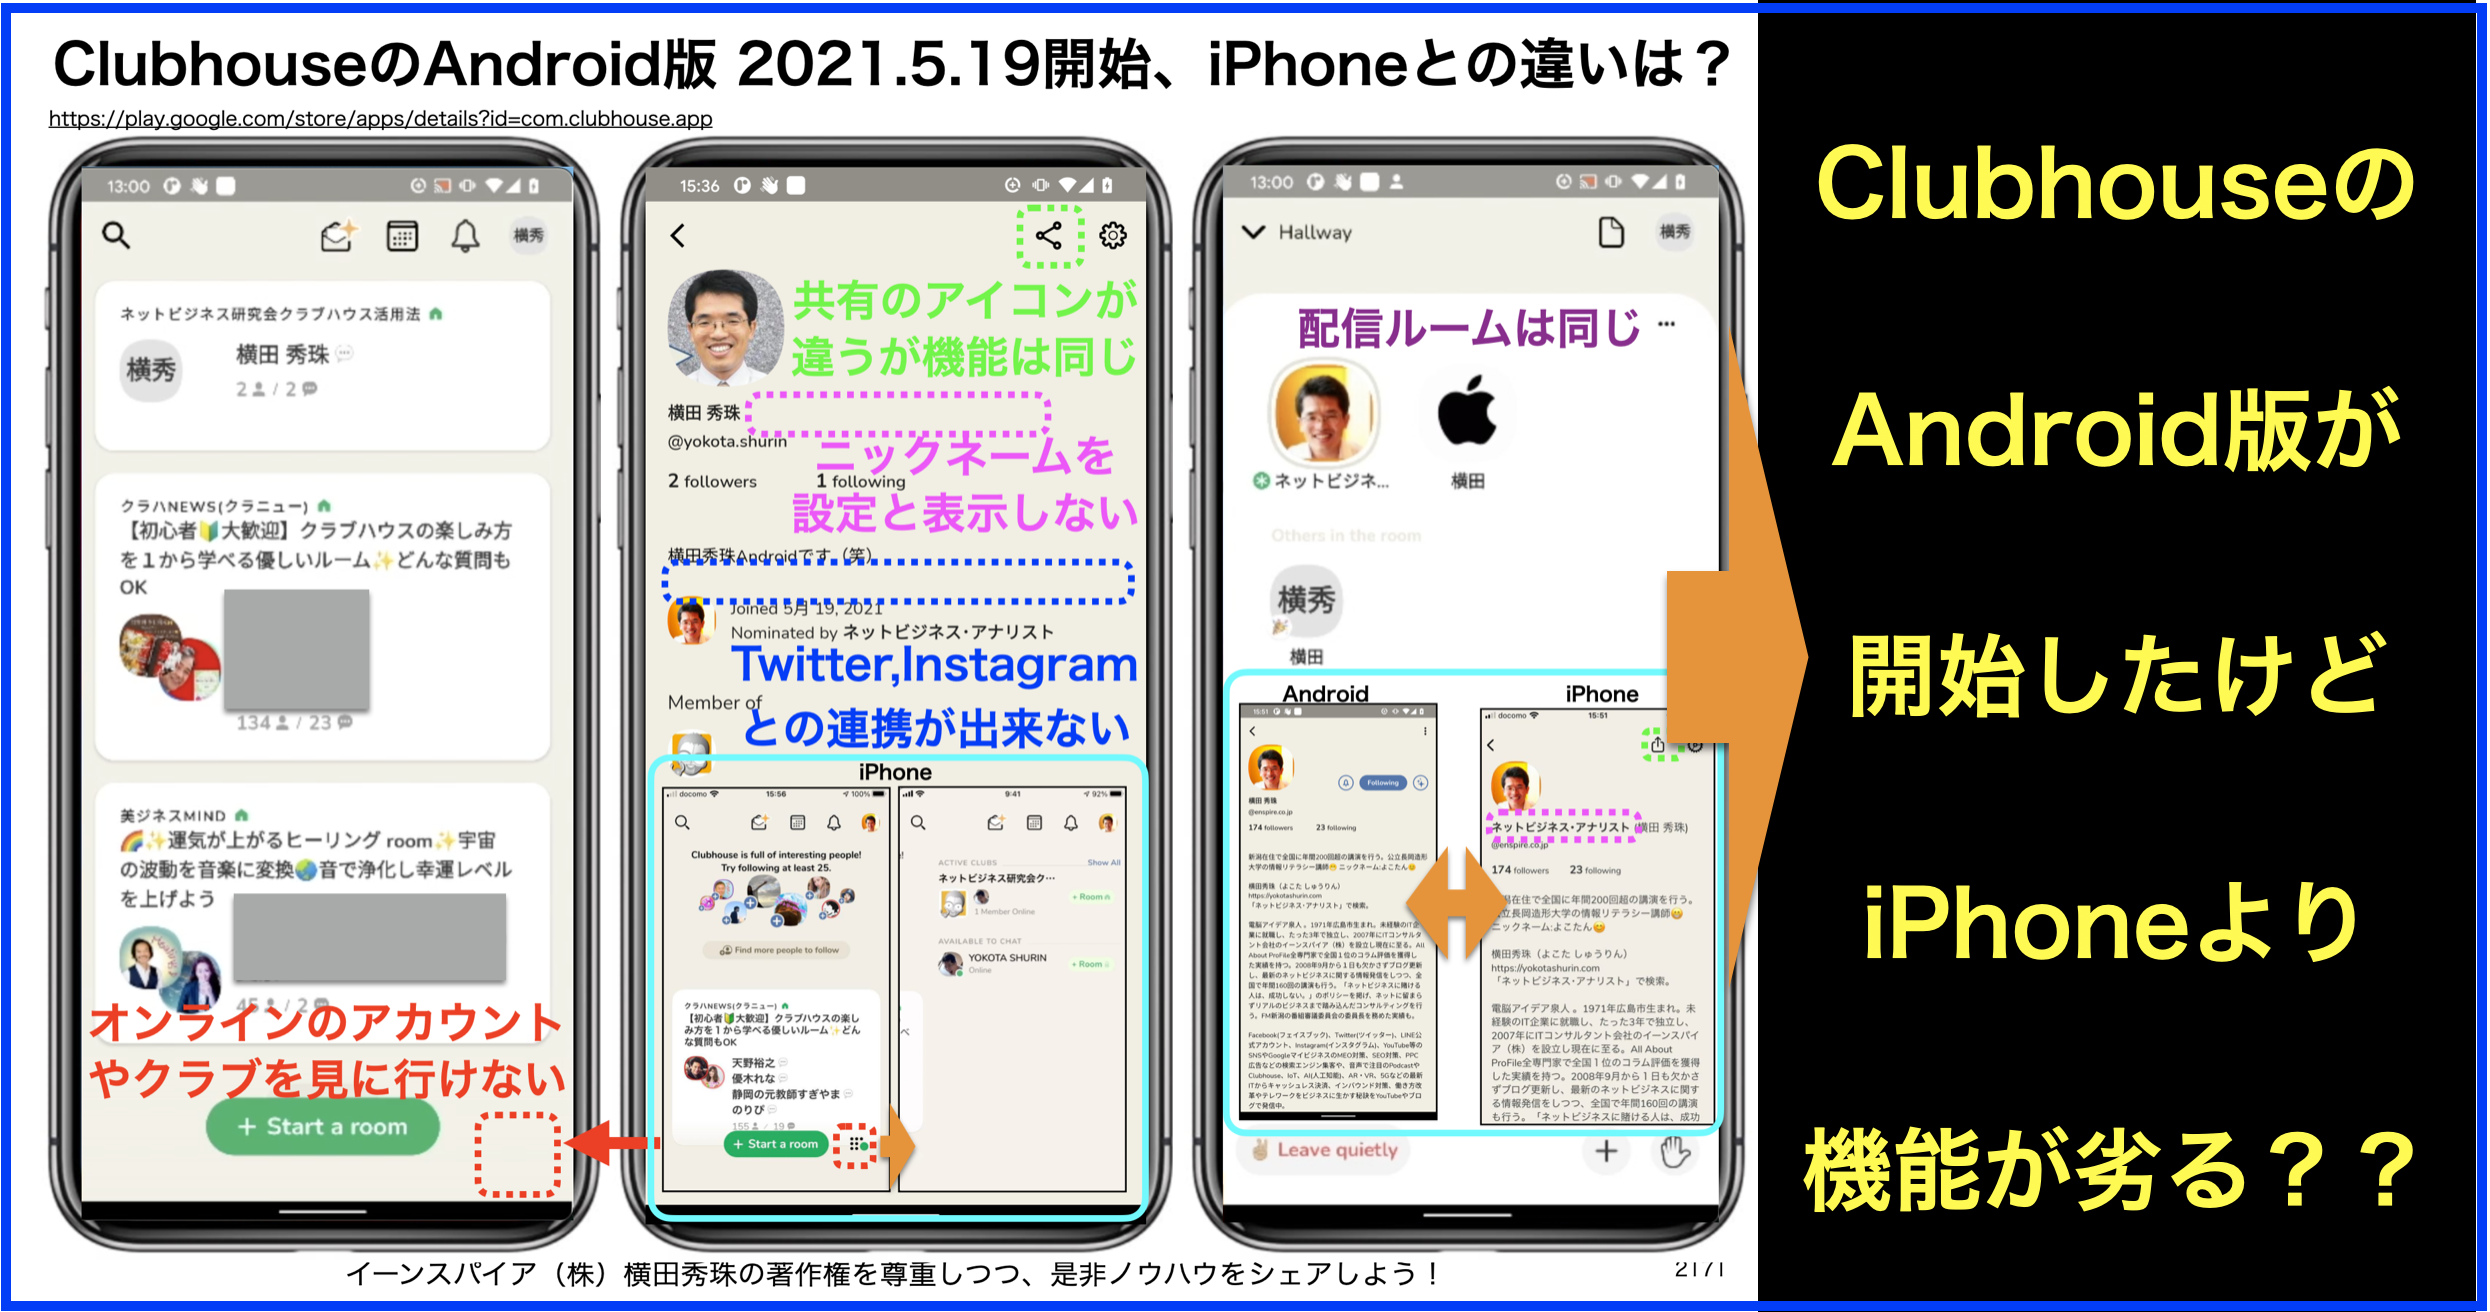 Clubhouse Android版 2021.5.19開始、iPhoneとの違い